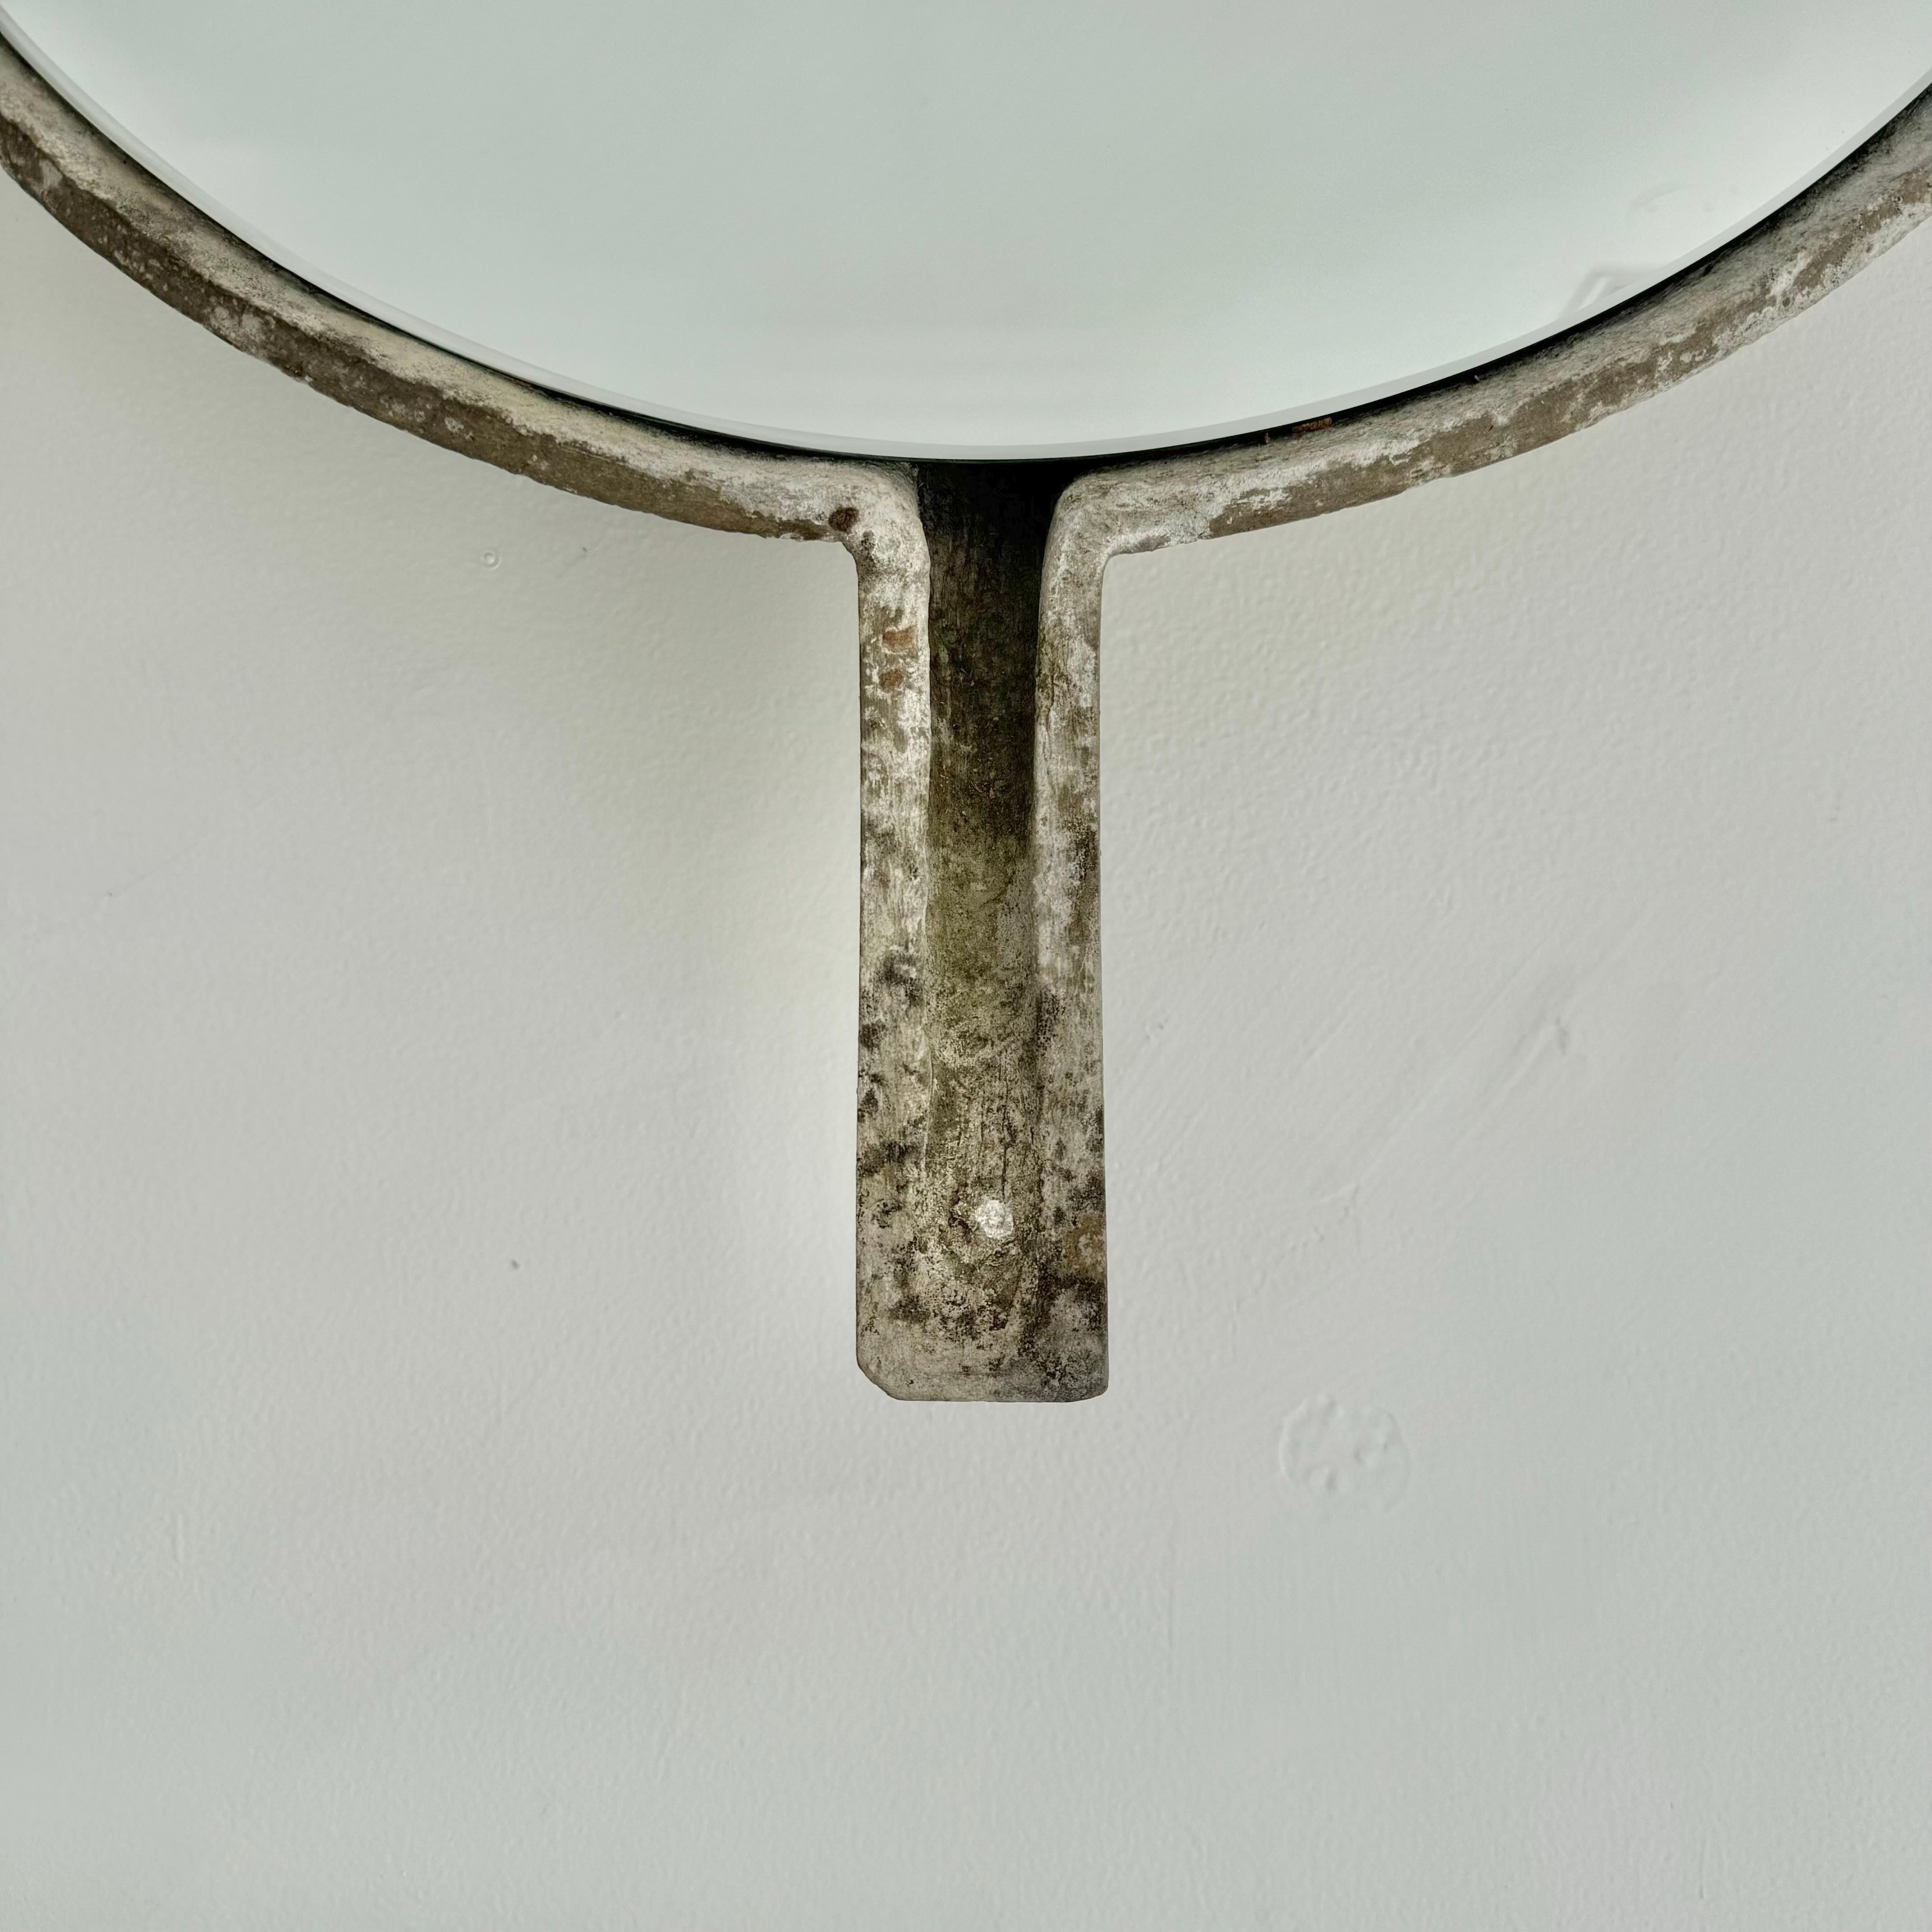 Swiss Willy Guhl Concrete Mirror with Spikes, 1960s Switzerland For Sale